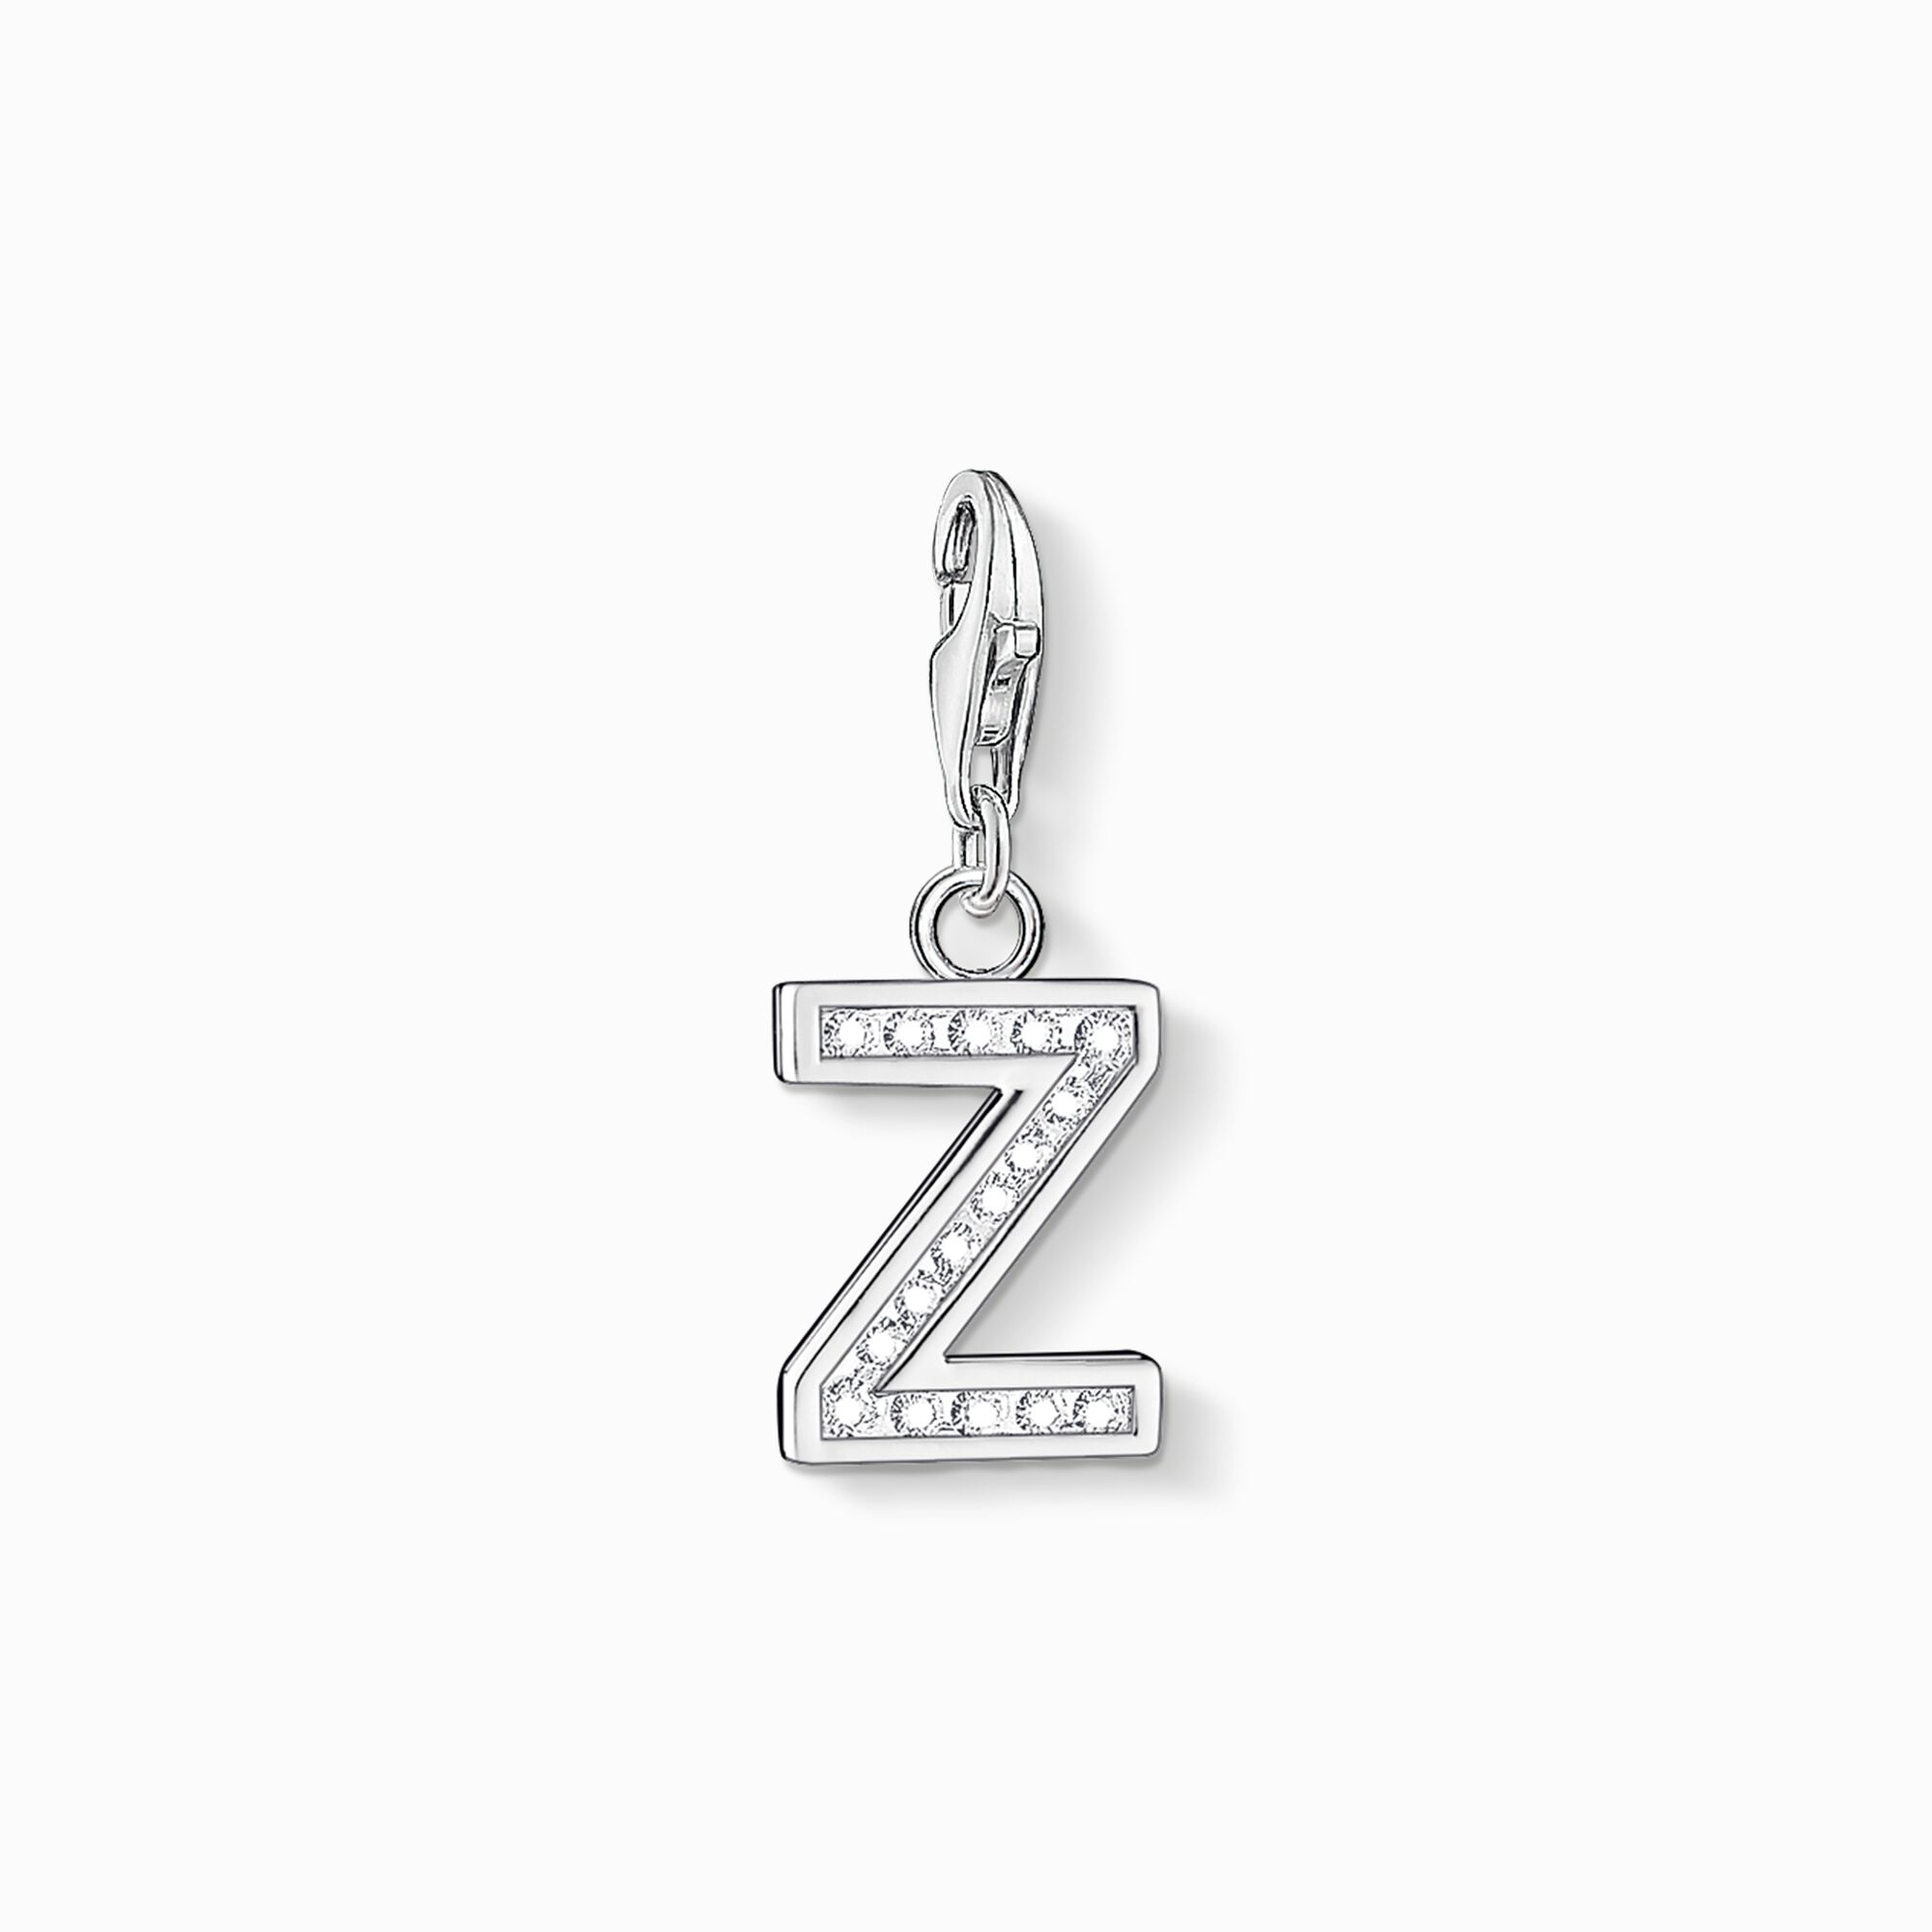 Charm pendant letter Z from the Charm Club collection in the THOMAS SABO online store